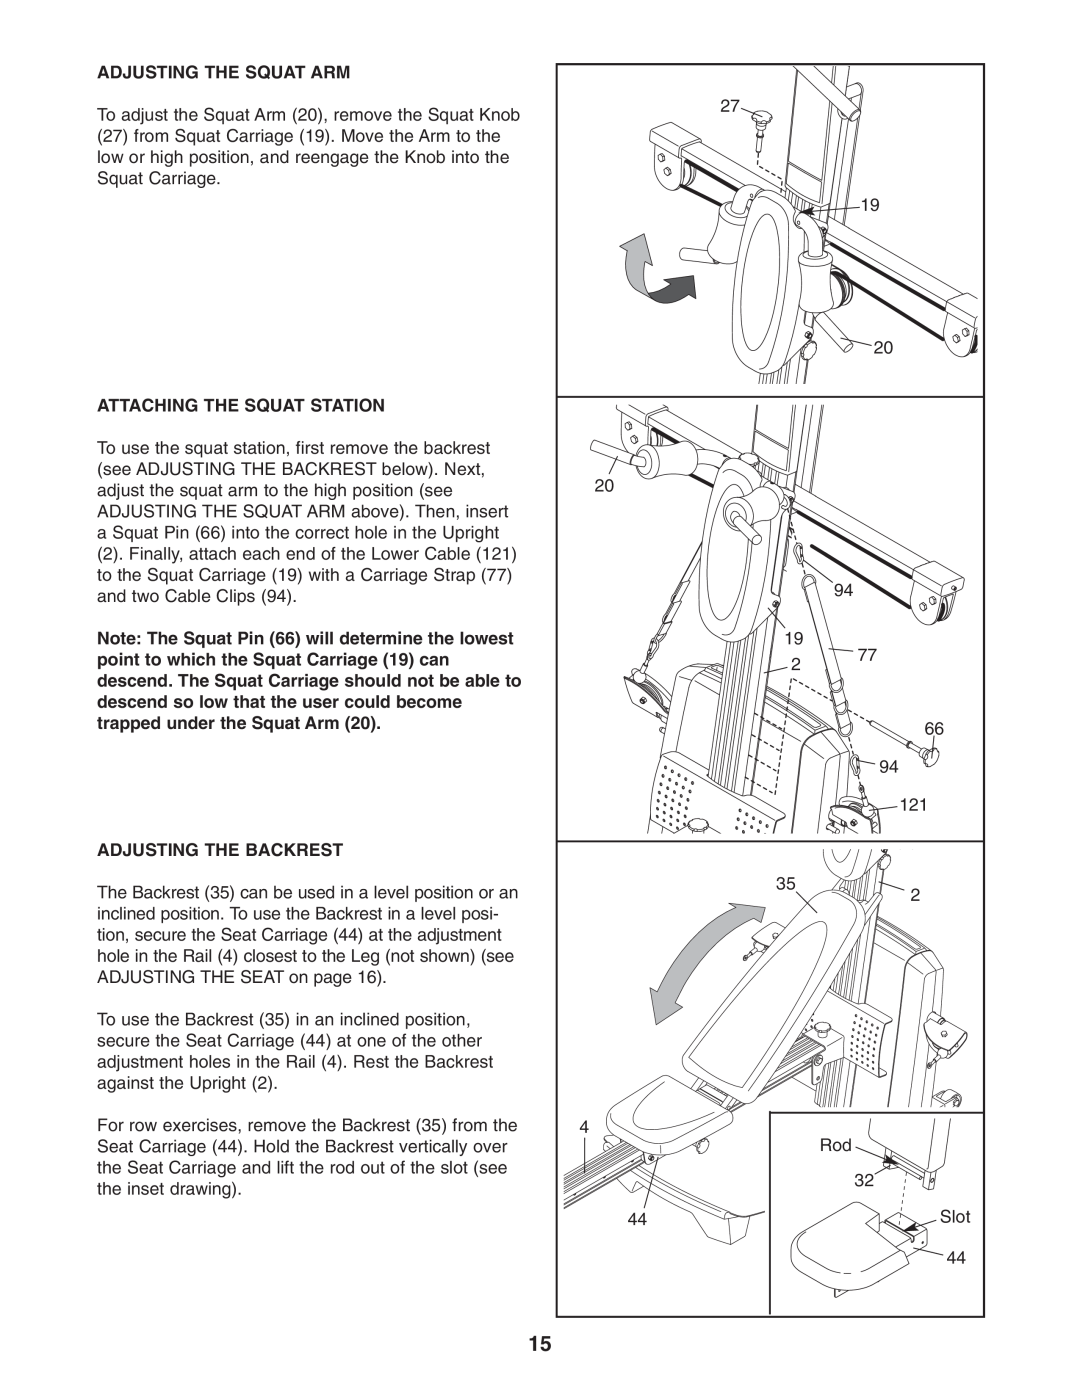 Weider WESY78734 user manual Adjusting The Squat Arm, Attaching The Squat Station, Adjusting The Backrest 